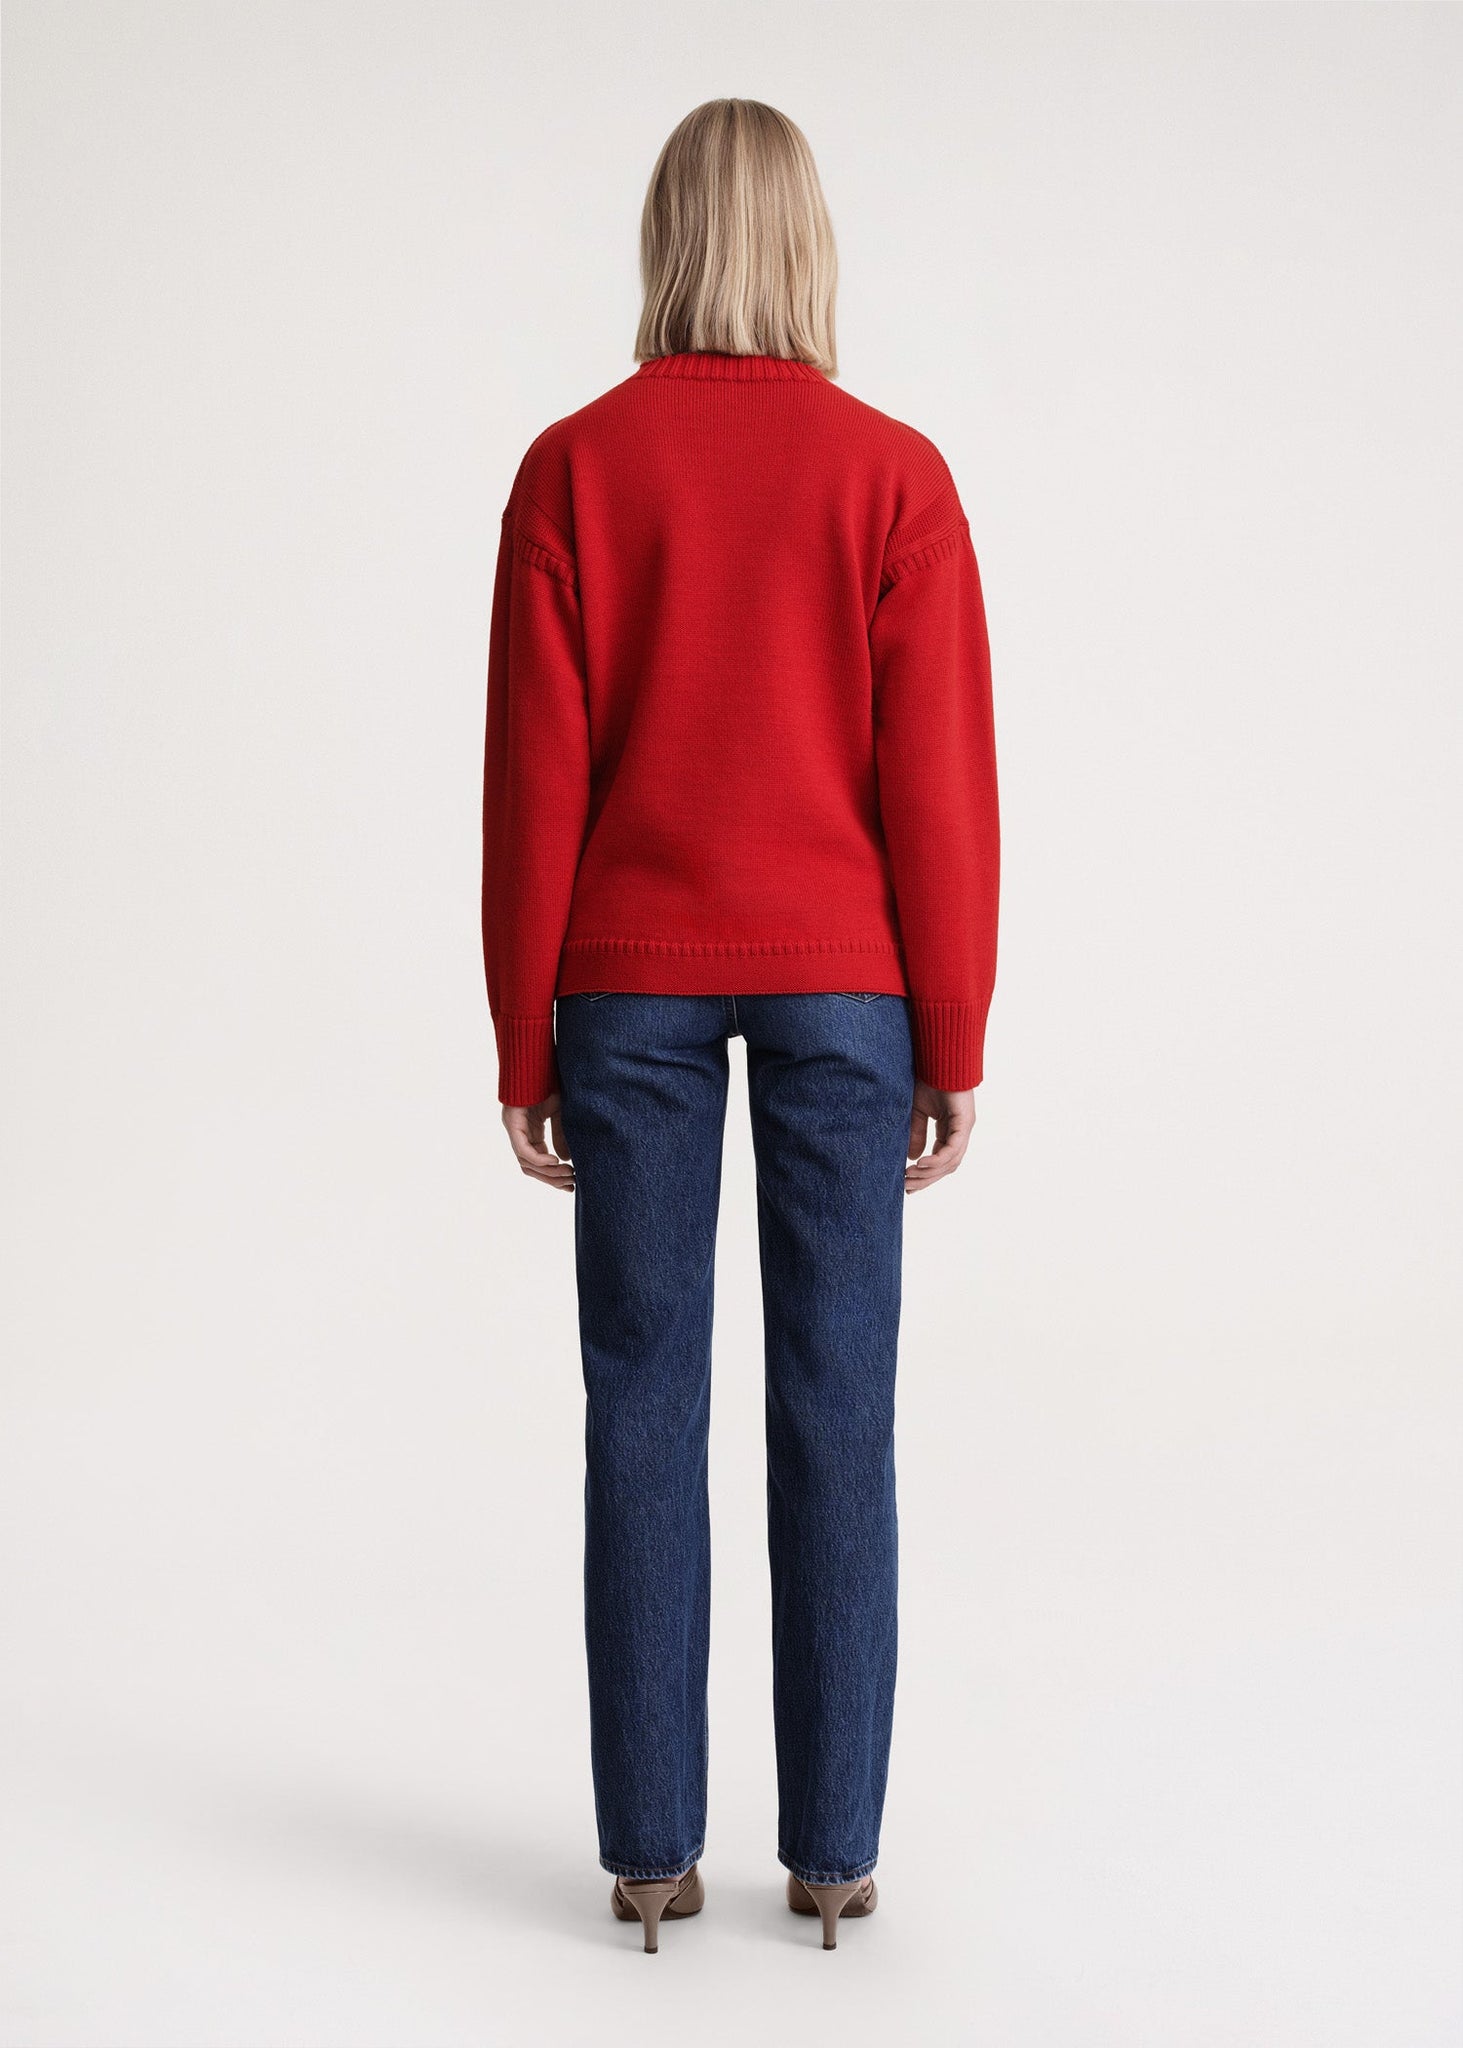 Wool guernsey knit red